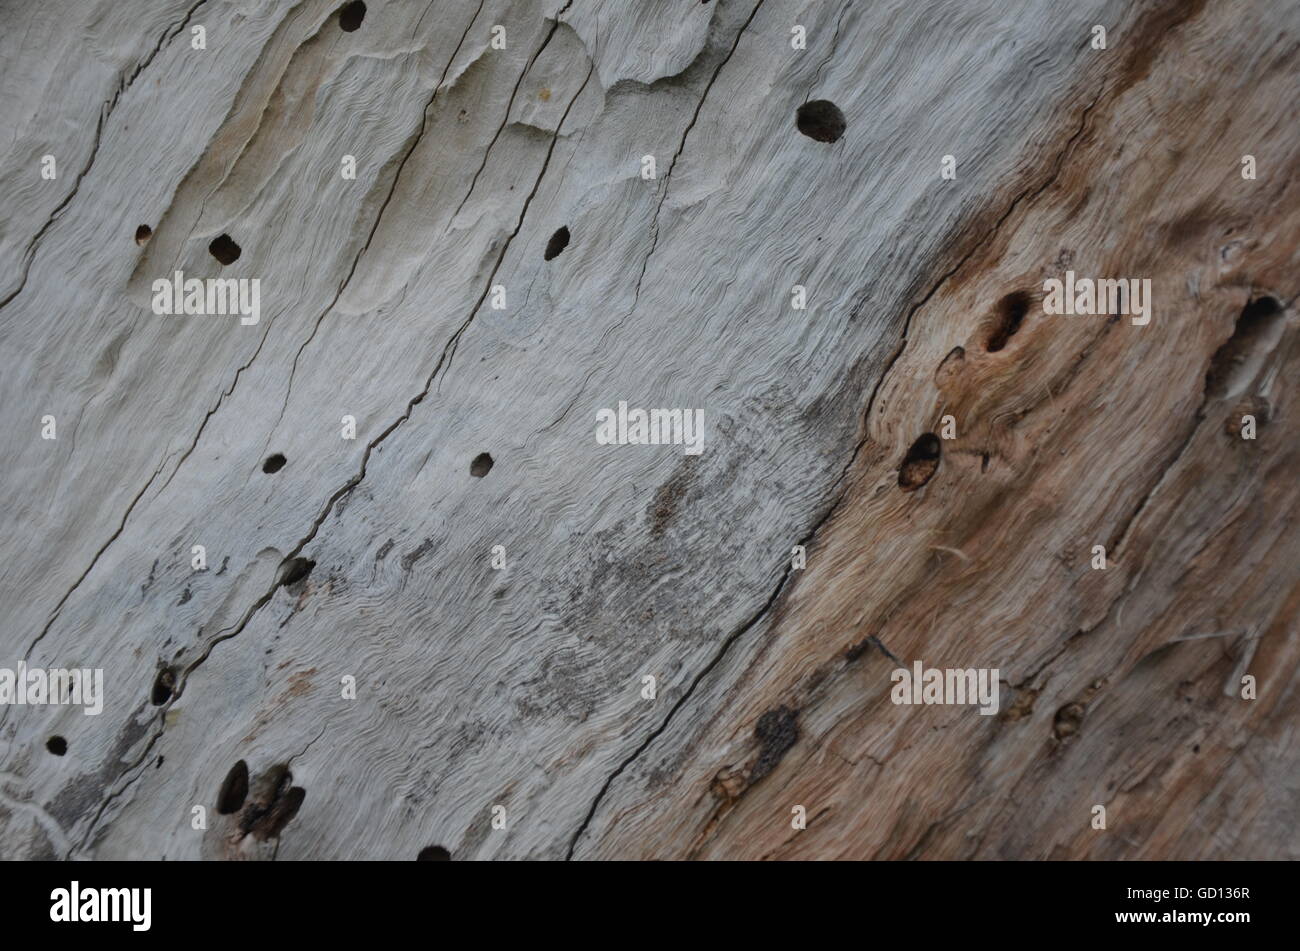 wood, worm, grain, tree, brown, old, macro, texture, eaten, background, hole, textured, wormhole, decay, wooden, rot, nature Stock Photo